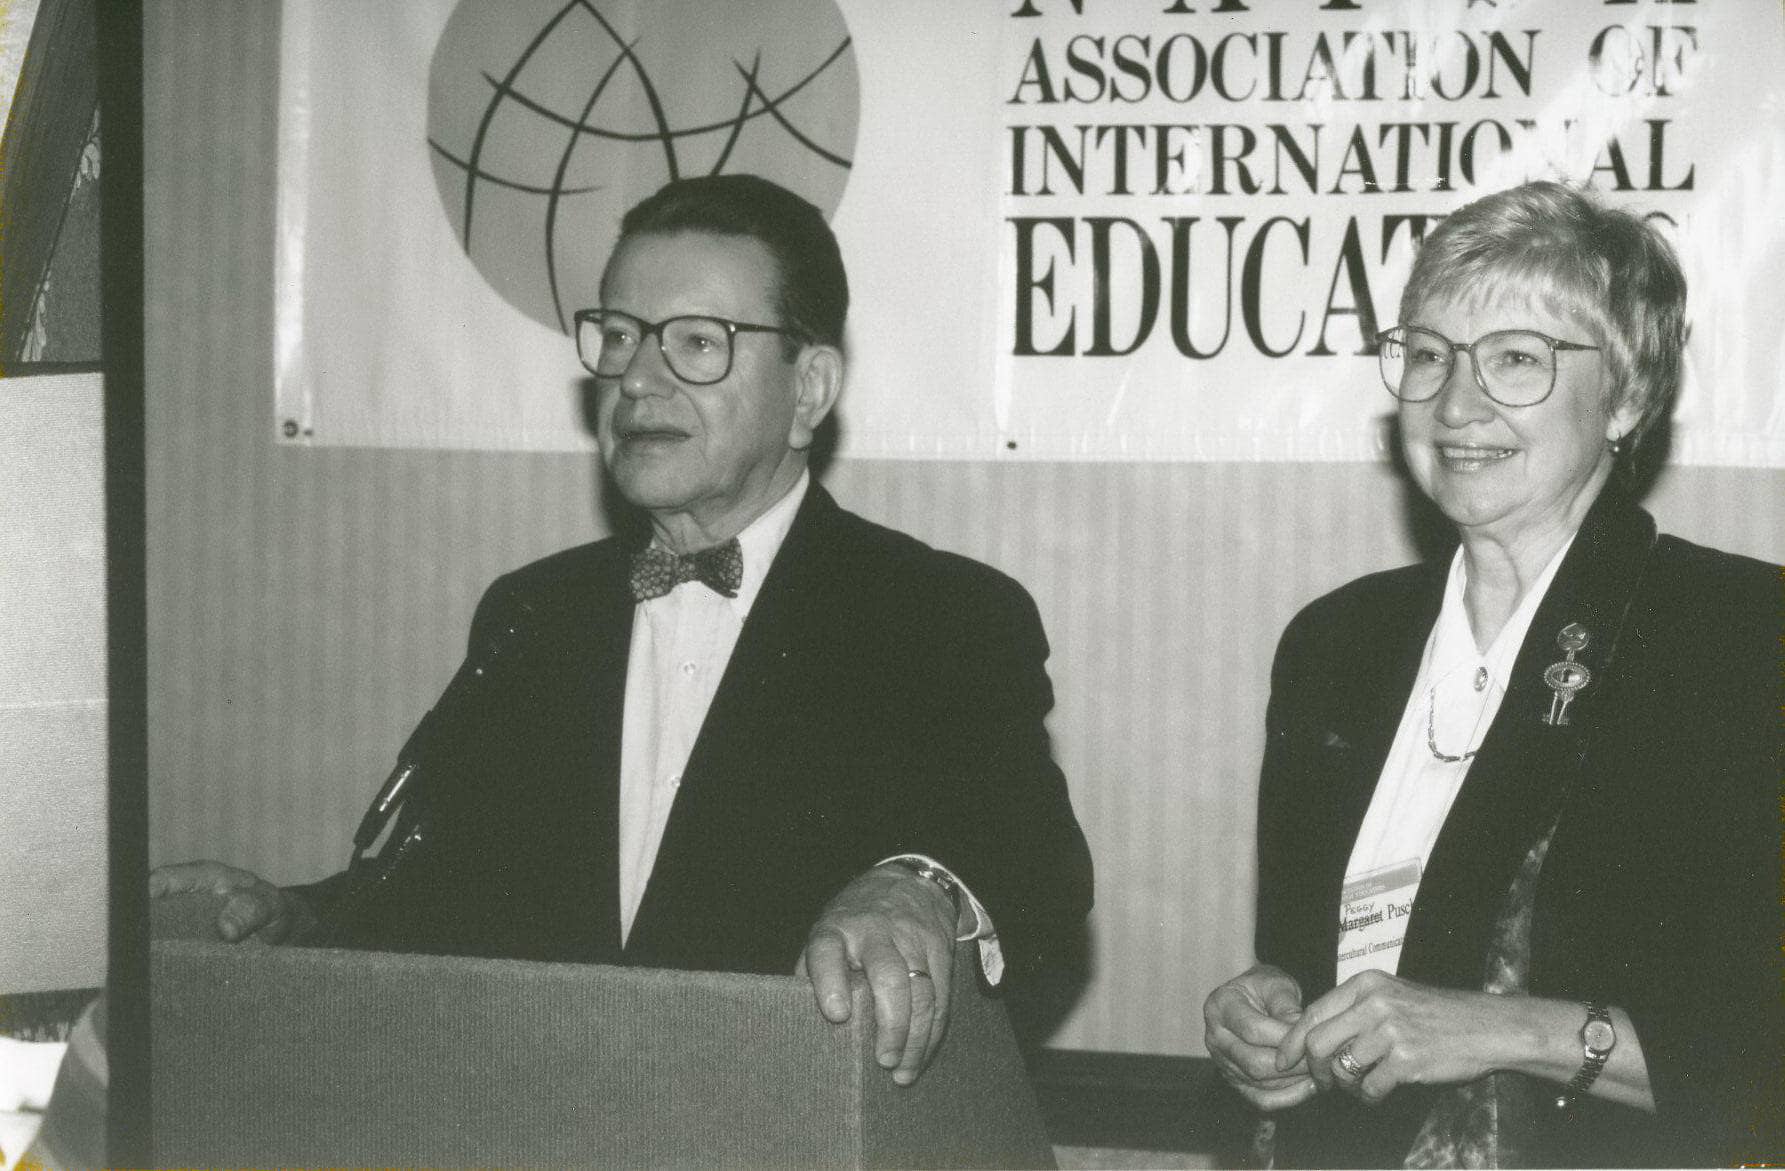 Sen. Paul Simon, speaking at the NAFSA conference in 1995.